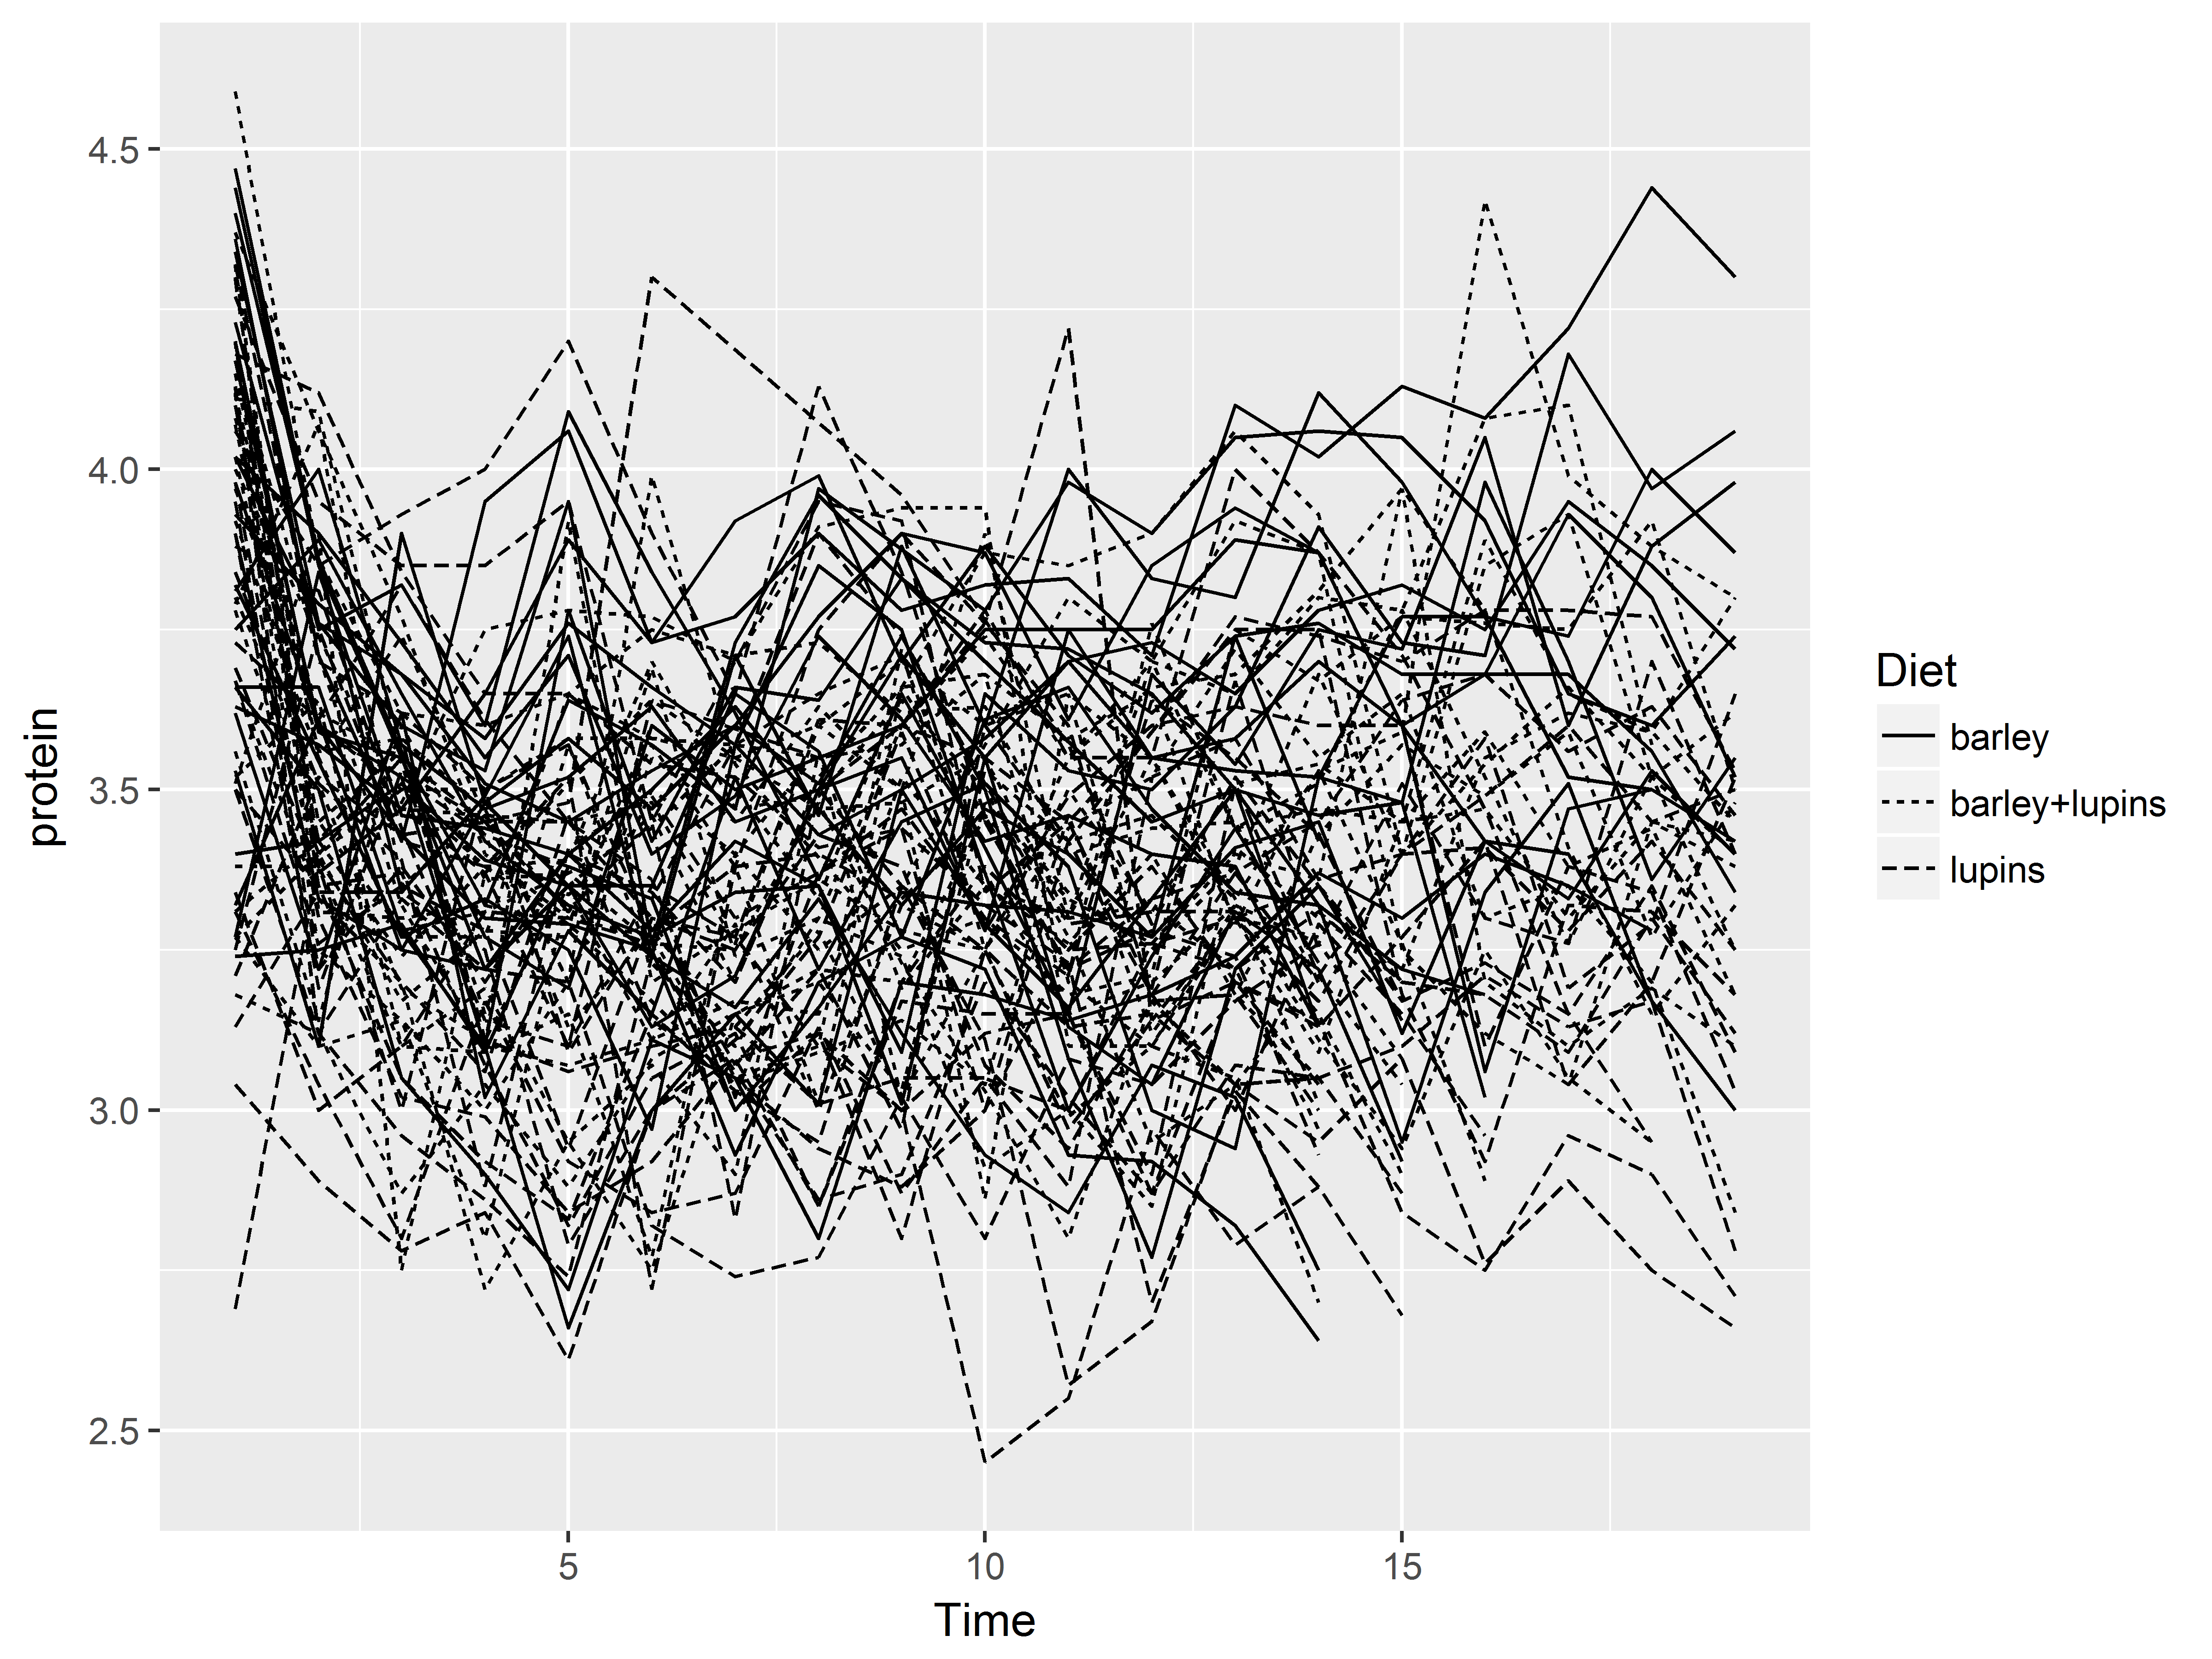 Fig 1.12d lines of Time vs protein by Cow, patterned by Diet